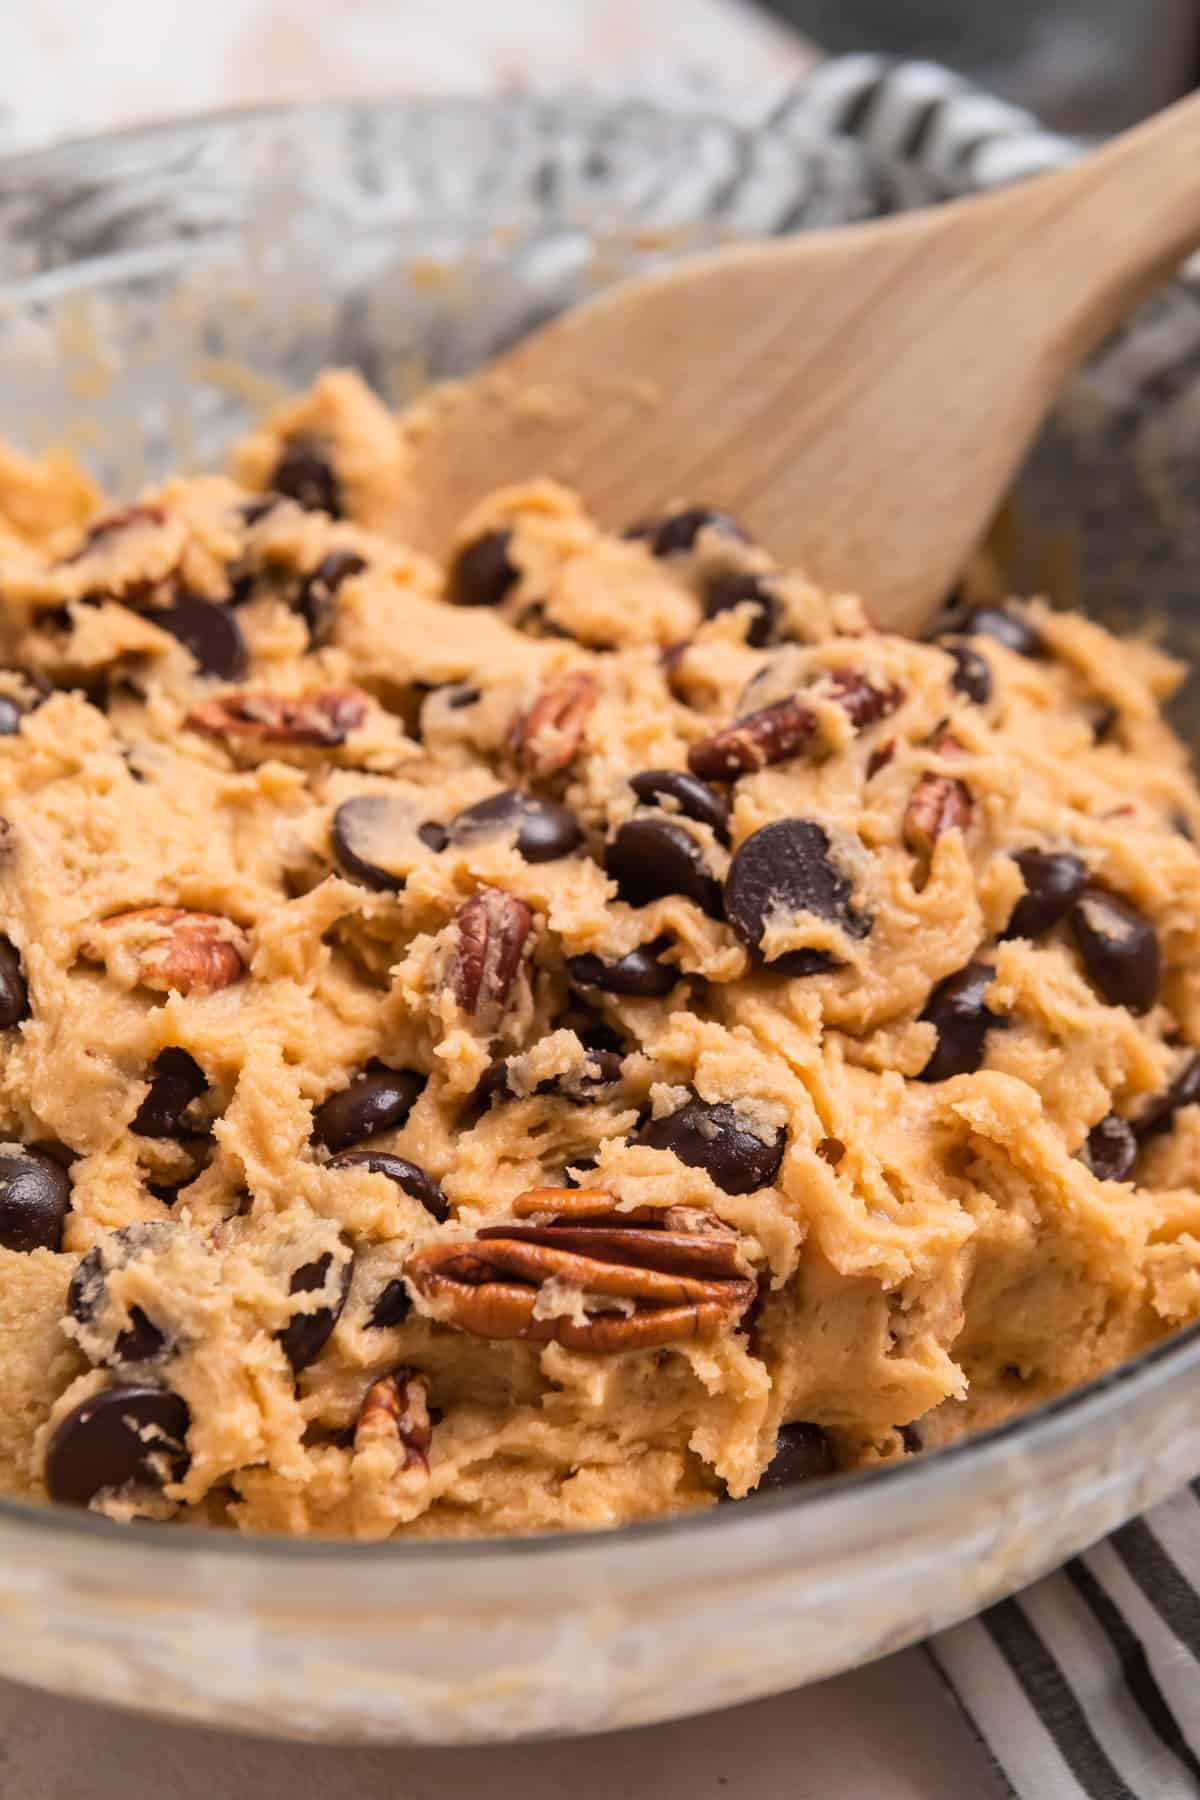 Chocolate chip pecan cookie dough in glass mixing bowl with wood spoon.